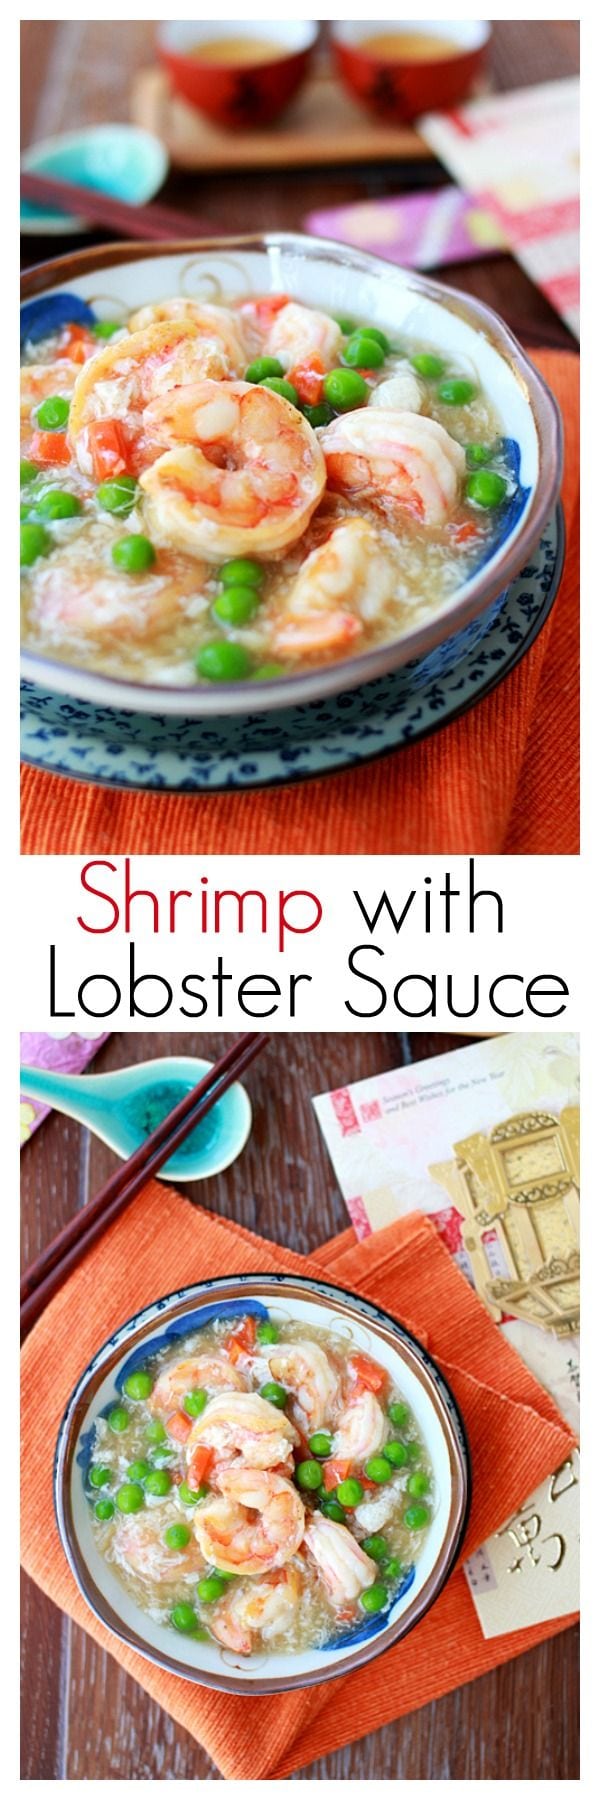 Shrimp with Lobster Sauce - quick, easy recipe that produces the most delicious shrimp in eggy lobster sauce!! | rasamalaysia.com